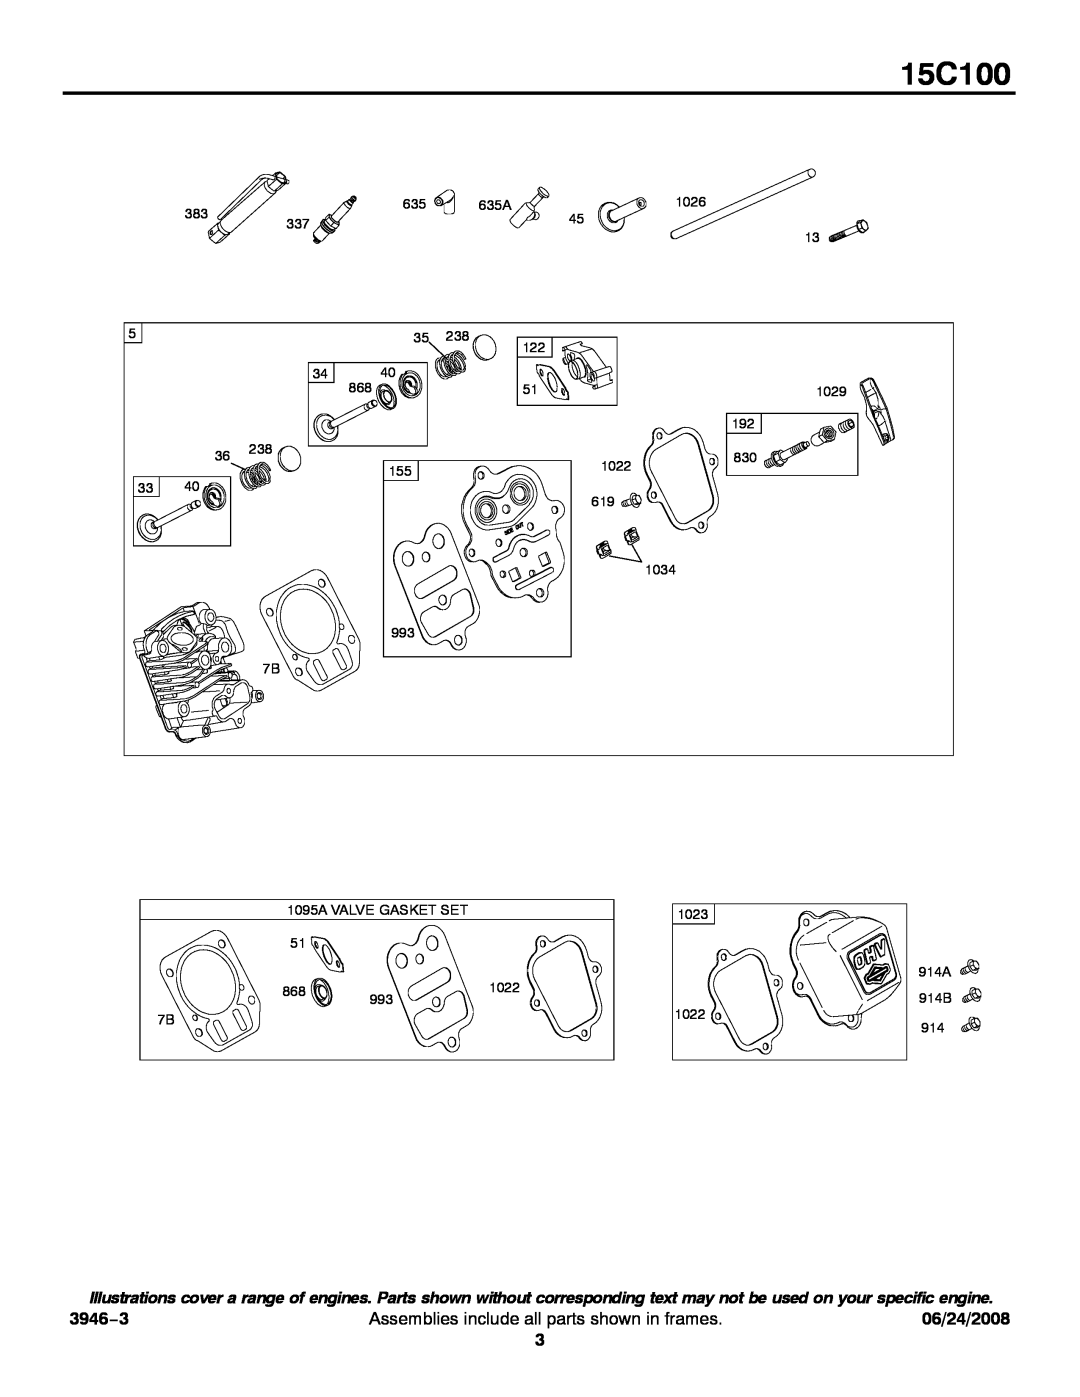 Briggs & Stratton 15C100 service manual 3946−3, Assemblies include all parts shown in frames, 06/24/2008, 914A 